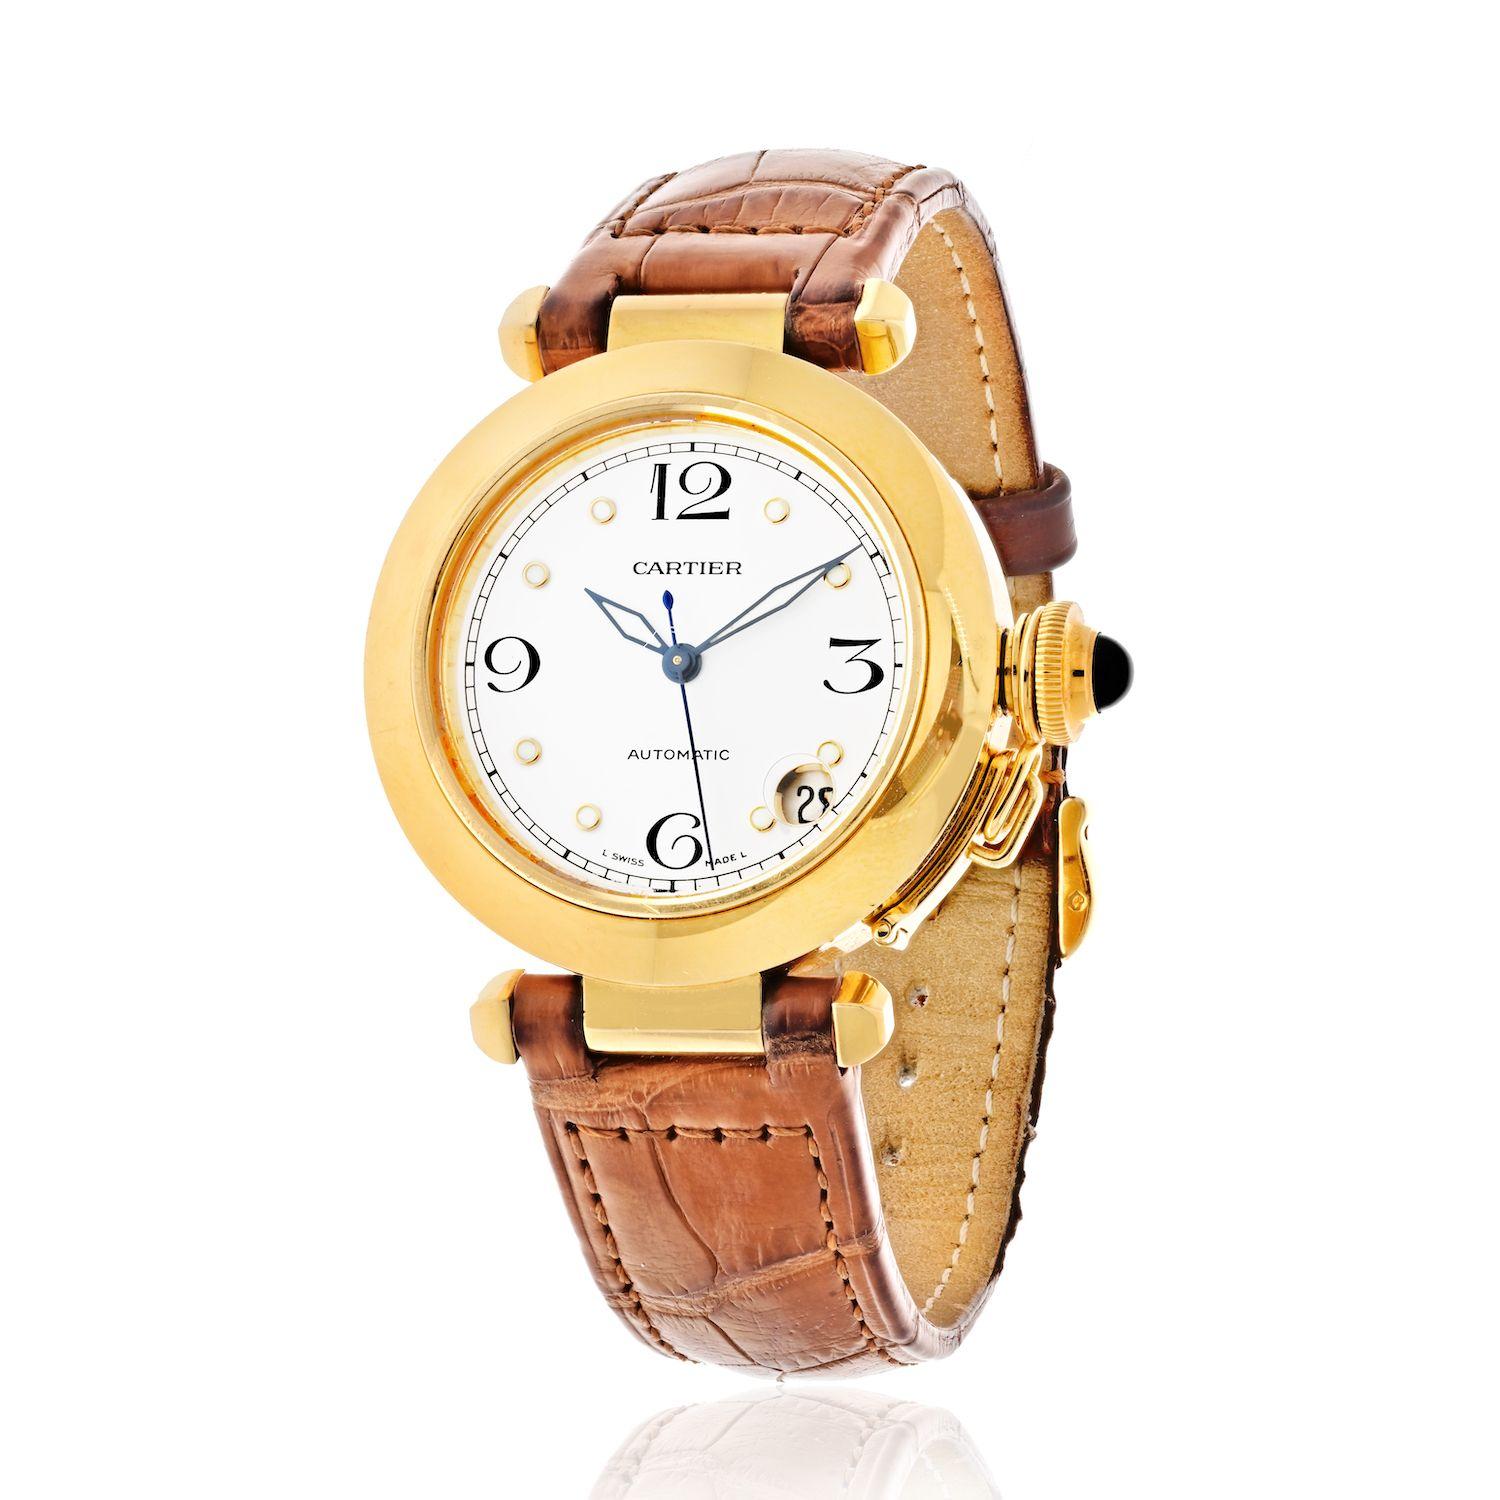 Modern Cartier 18k Yellow Gold Smooth Bezel White Dial Automatic Ladies Watch